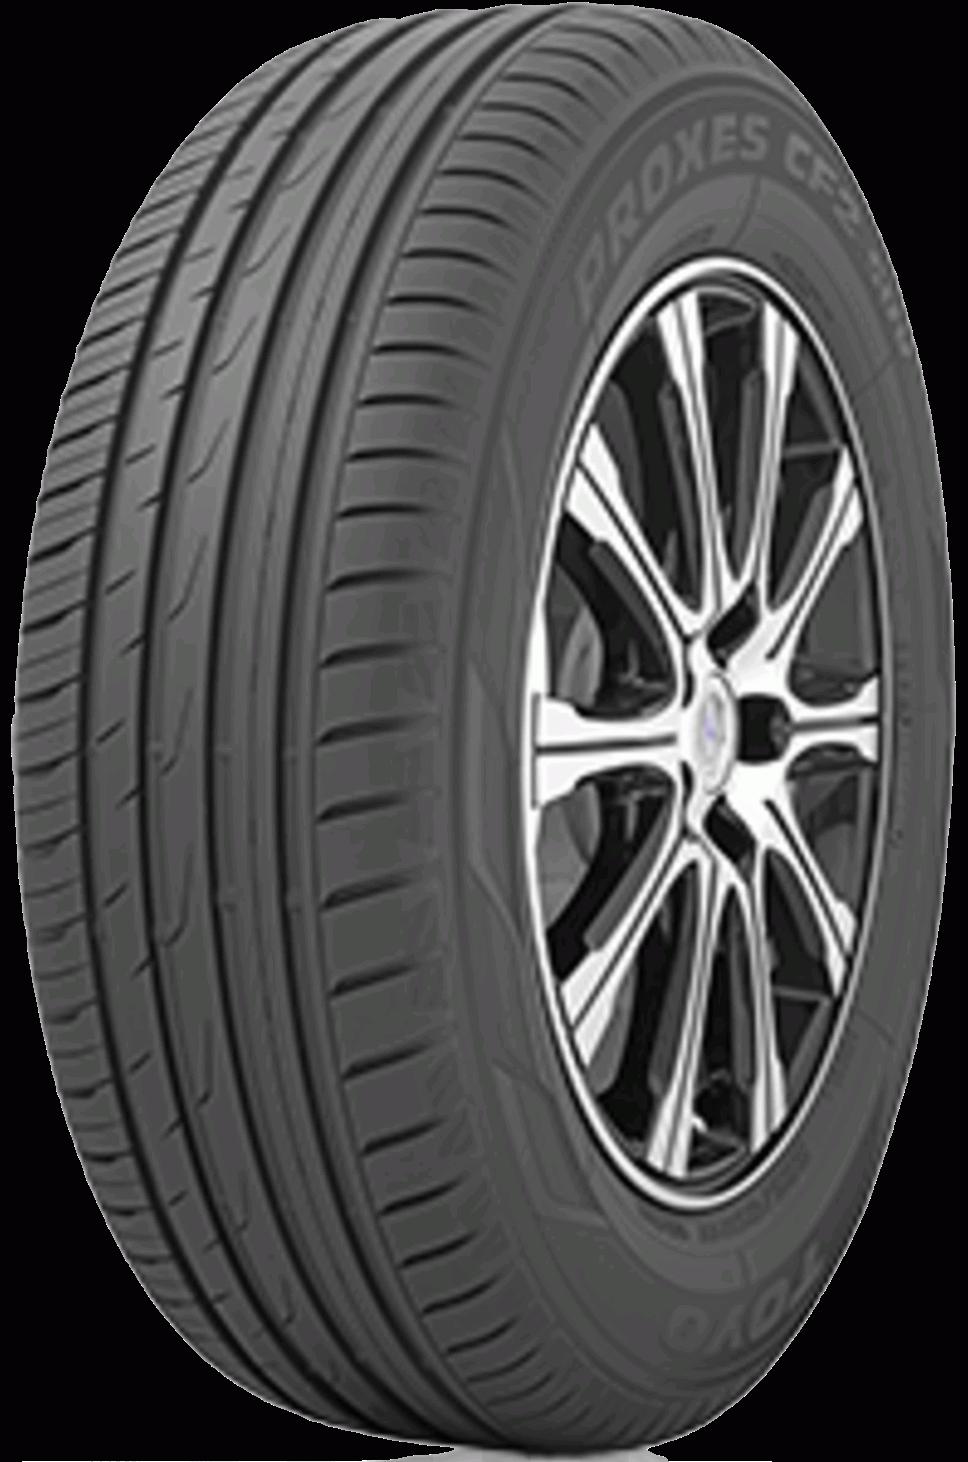 Toyo Proxes CF2 SUV - Tyre Reviews and Tests